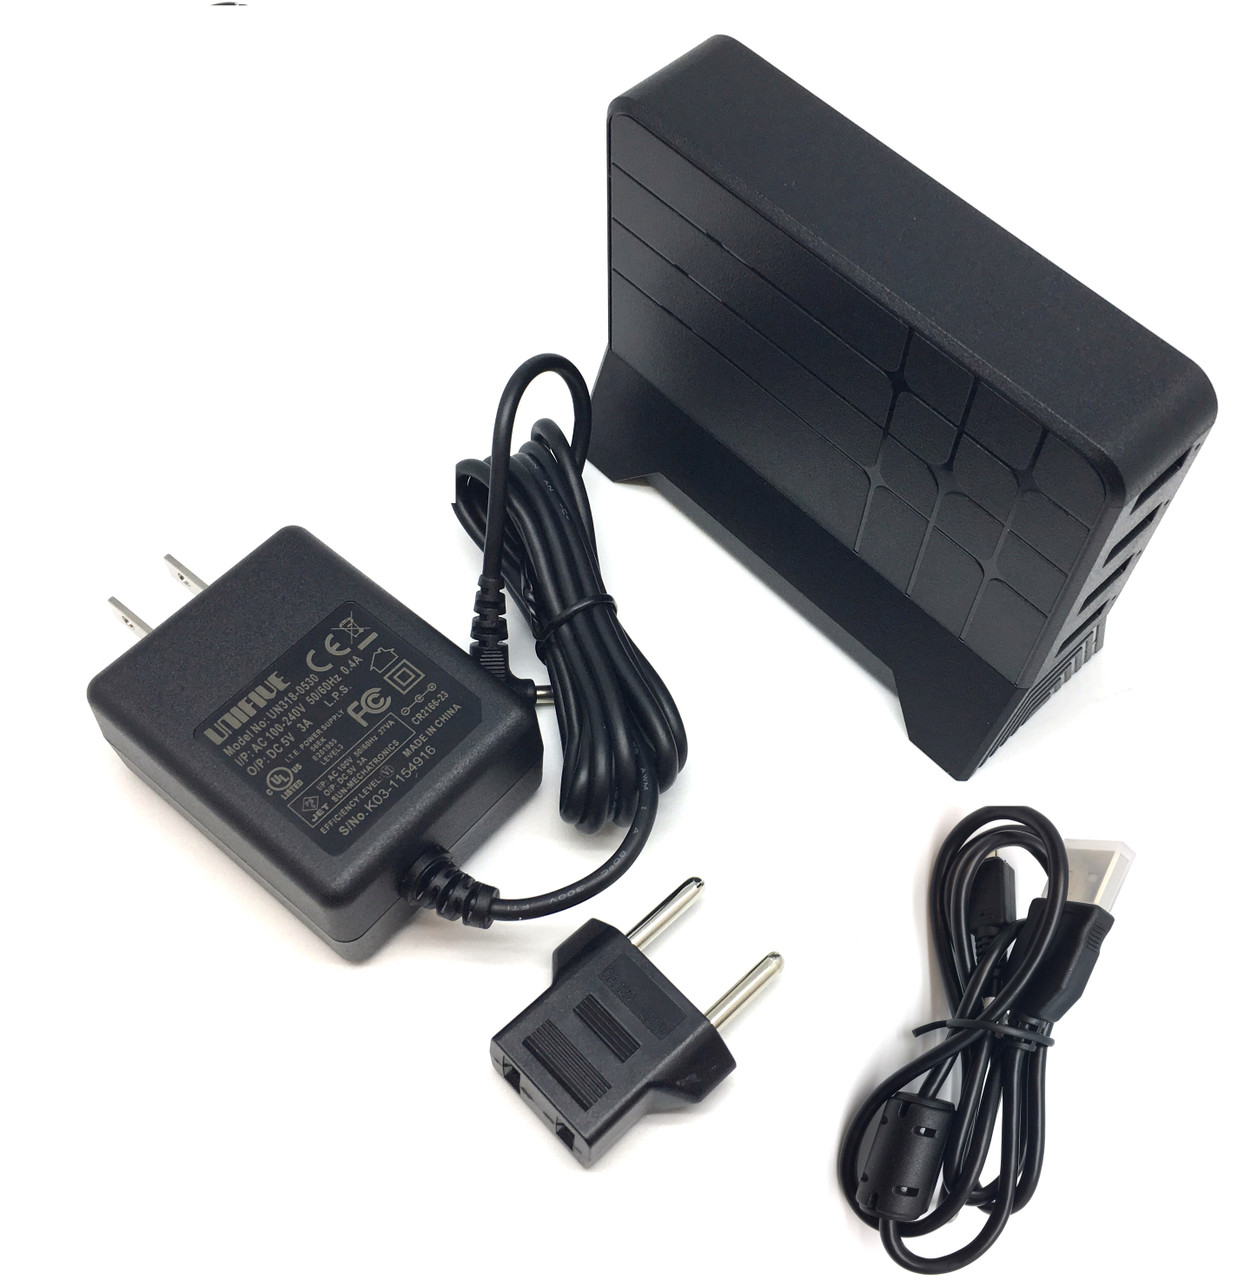 Lawmate PV-CS10i Covert Camera and DVR USB Charging Station accessories